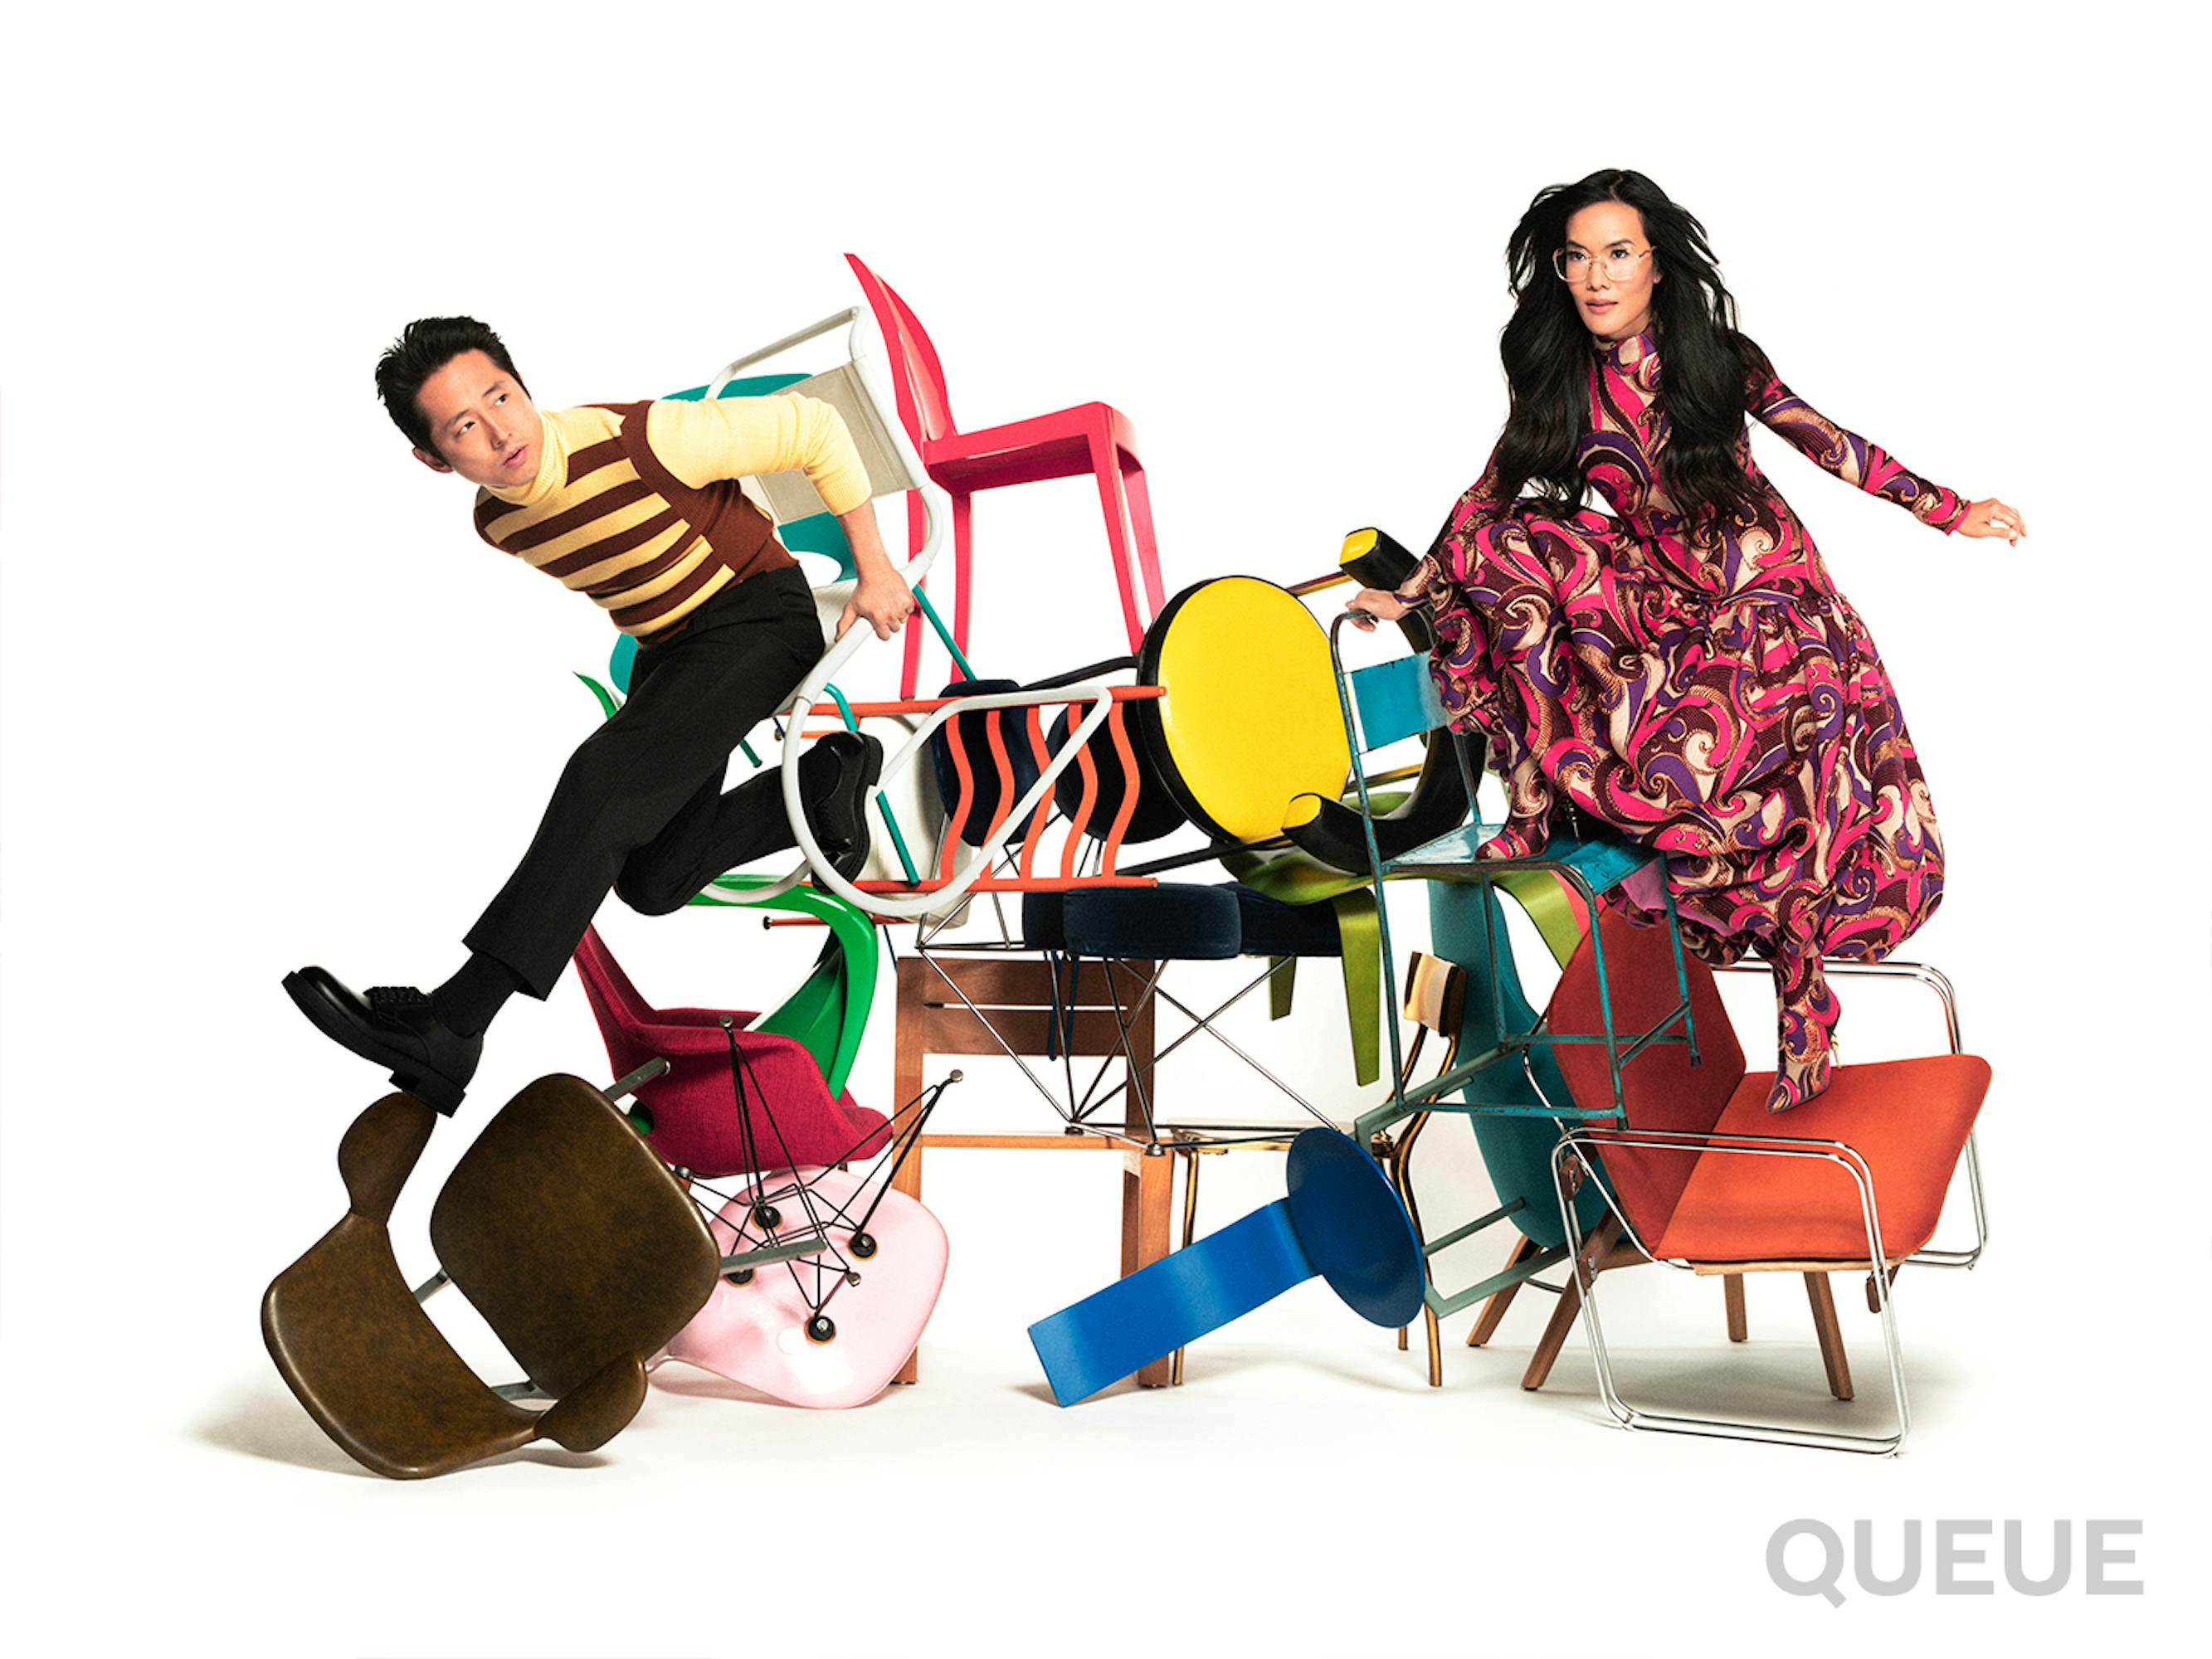 Steven Yeun and Ali Wong scramble over a pile of chairs.